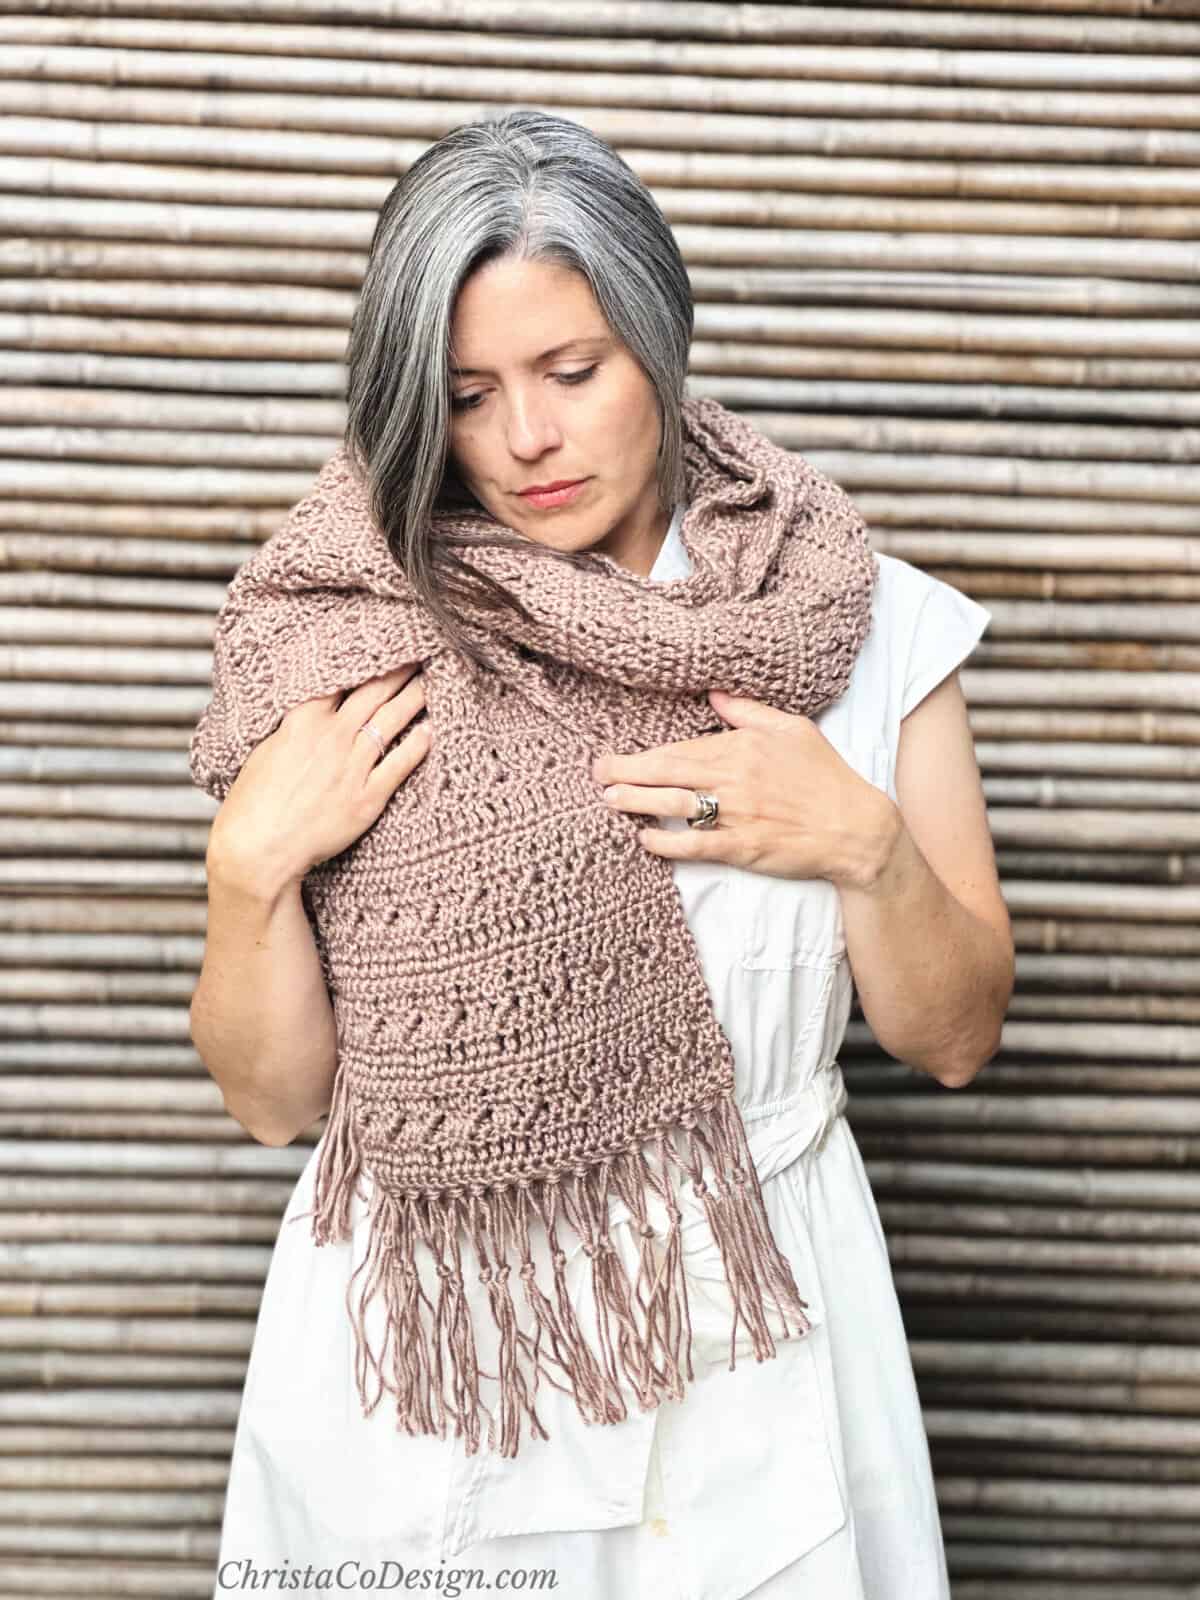 Woman in cocoa colored super scarf with fringe.